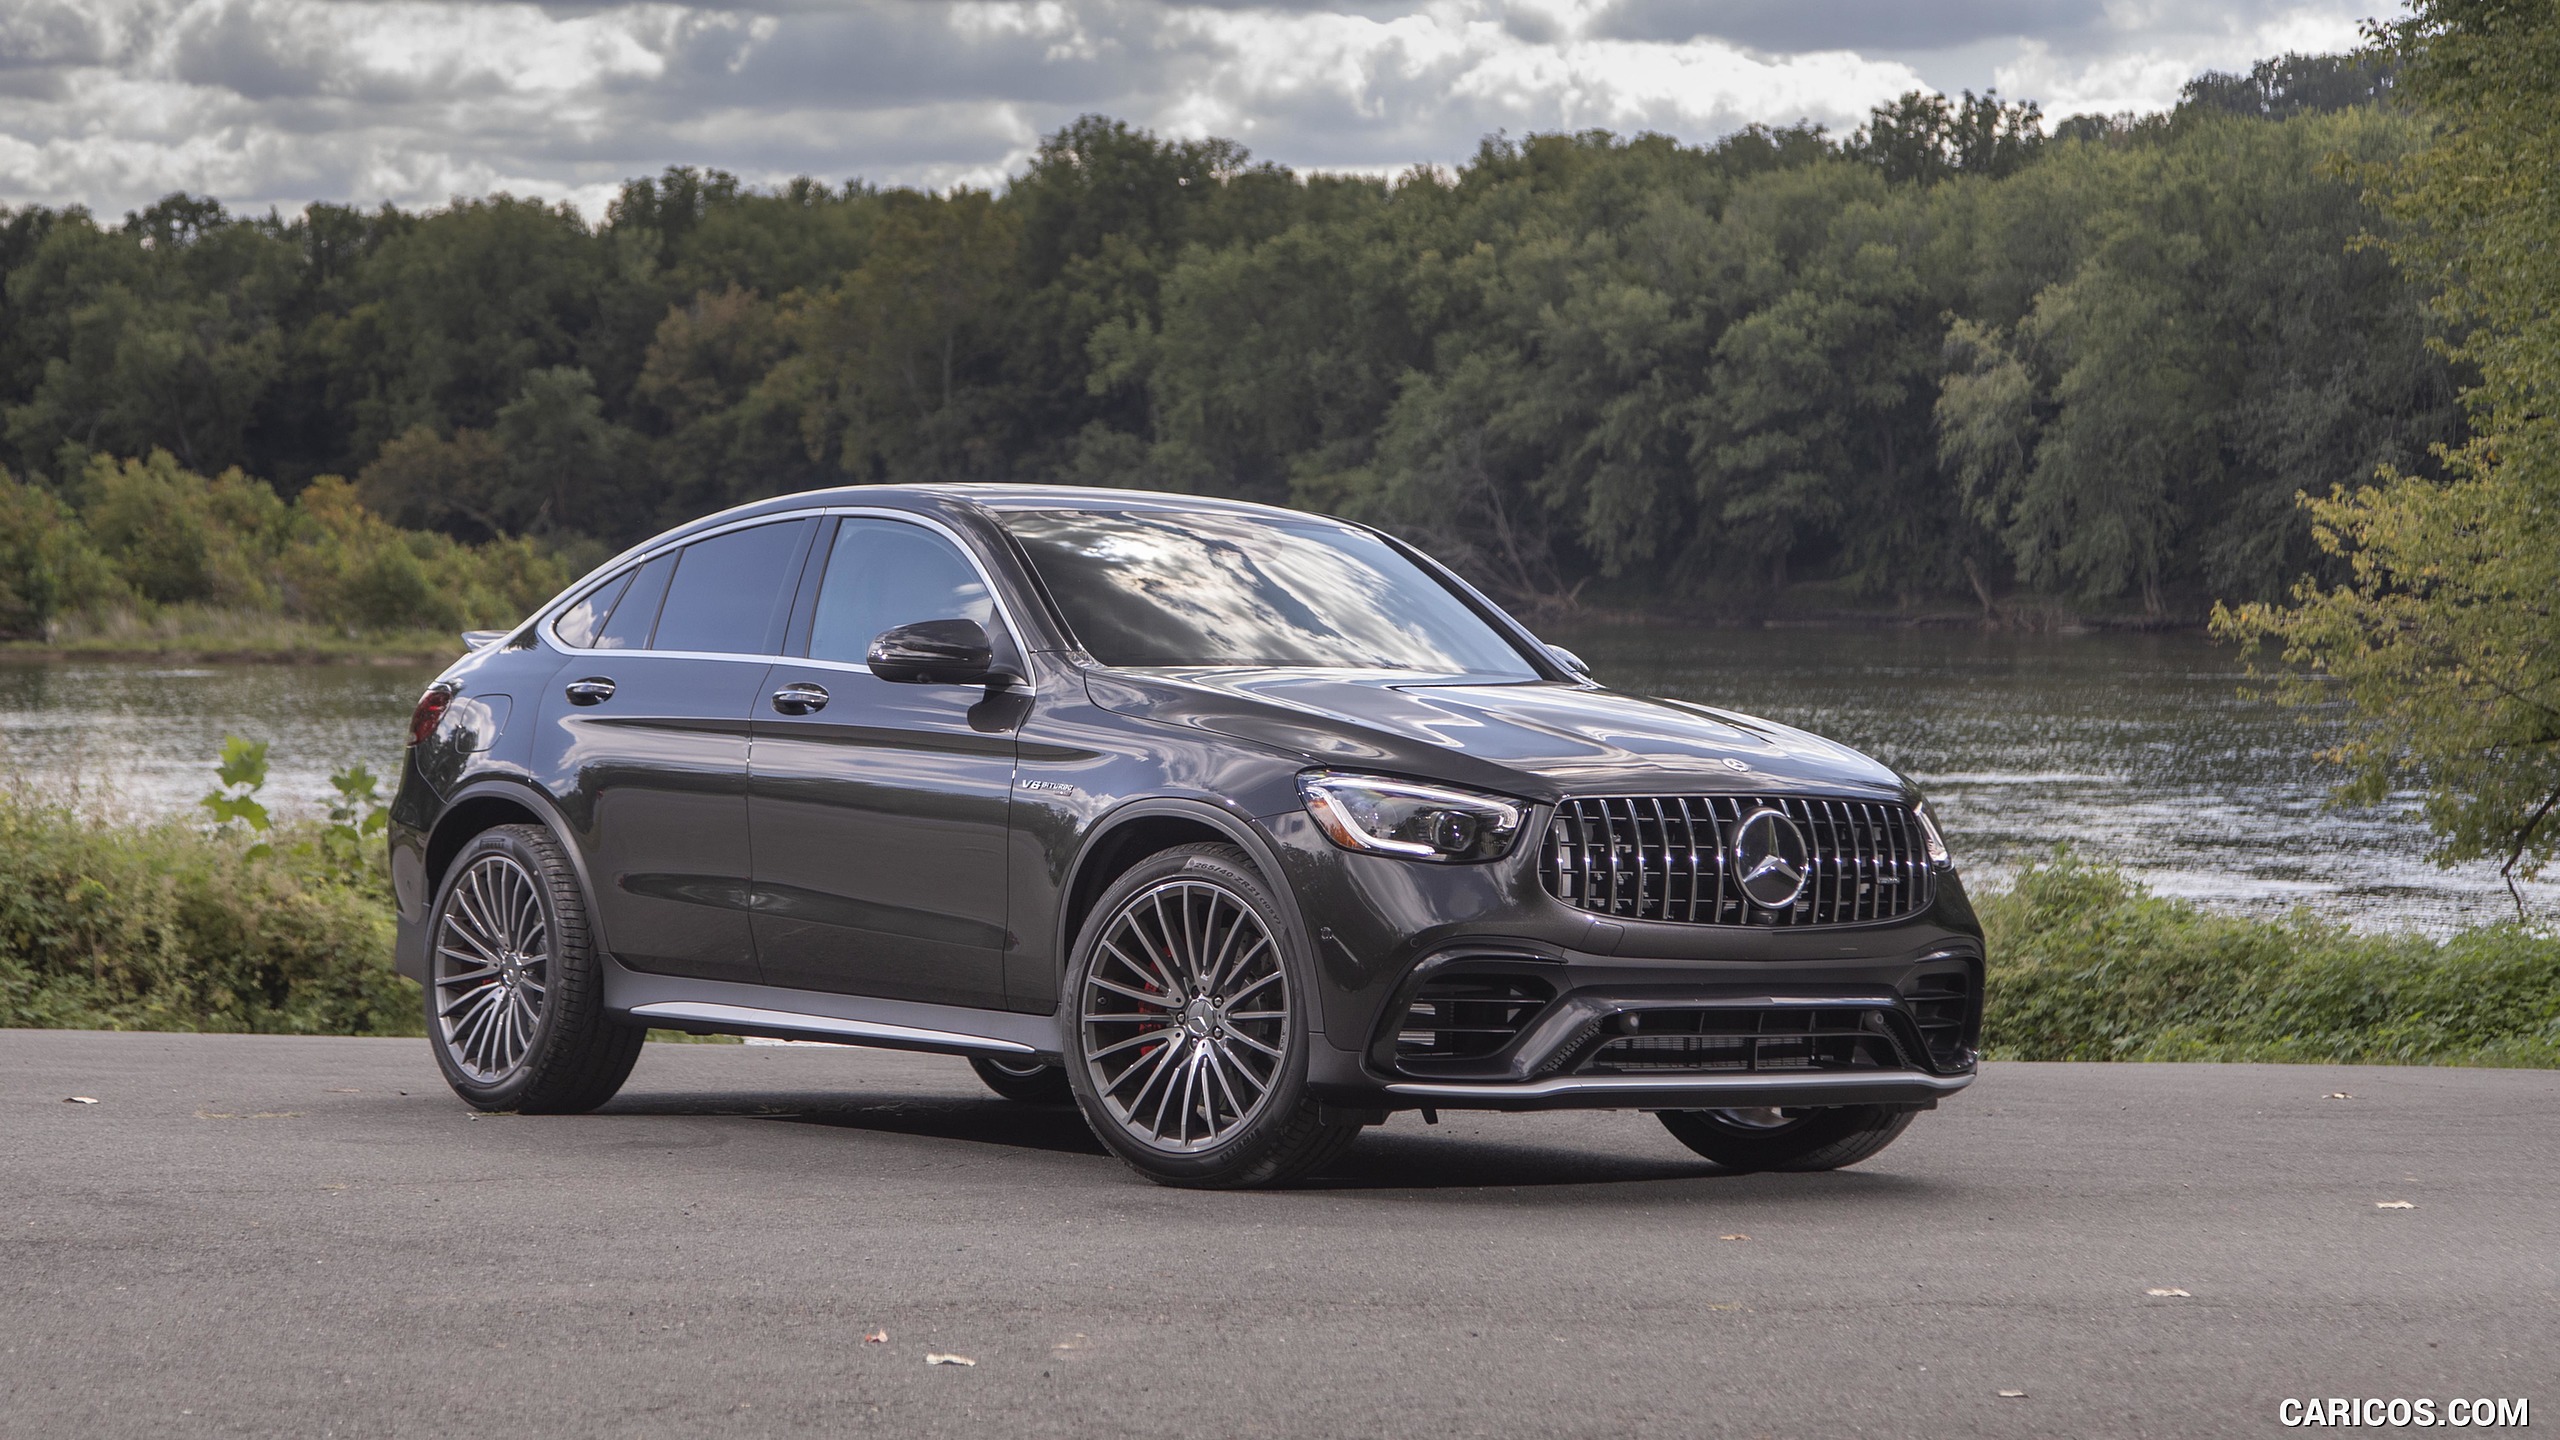 2020 Mercedes-AMG GLC 63 S Coupe (US-Spec) - Front Three-Quarter, #50 of 102